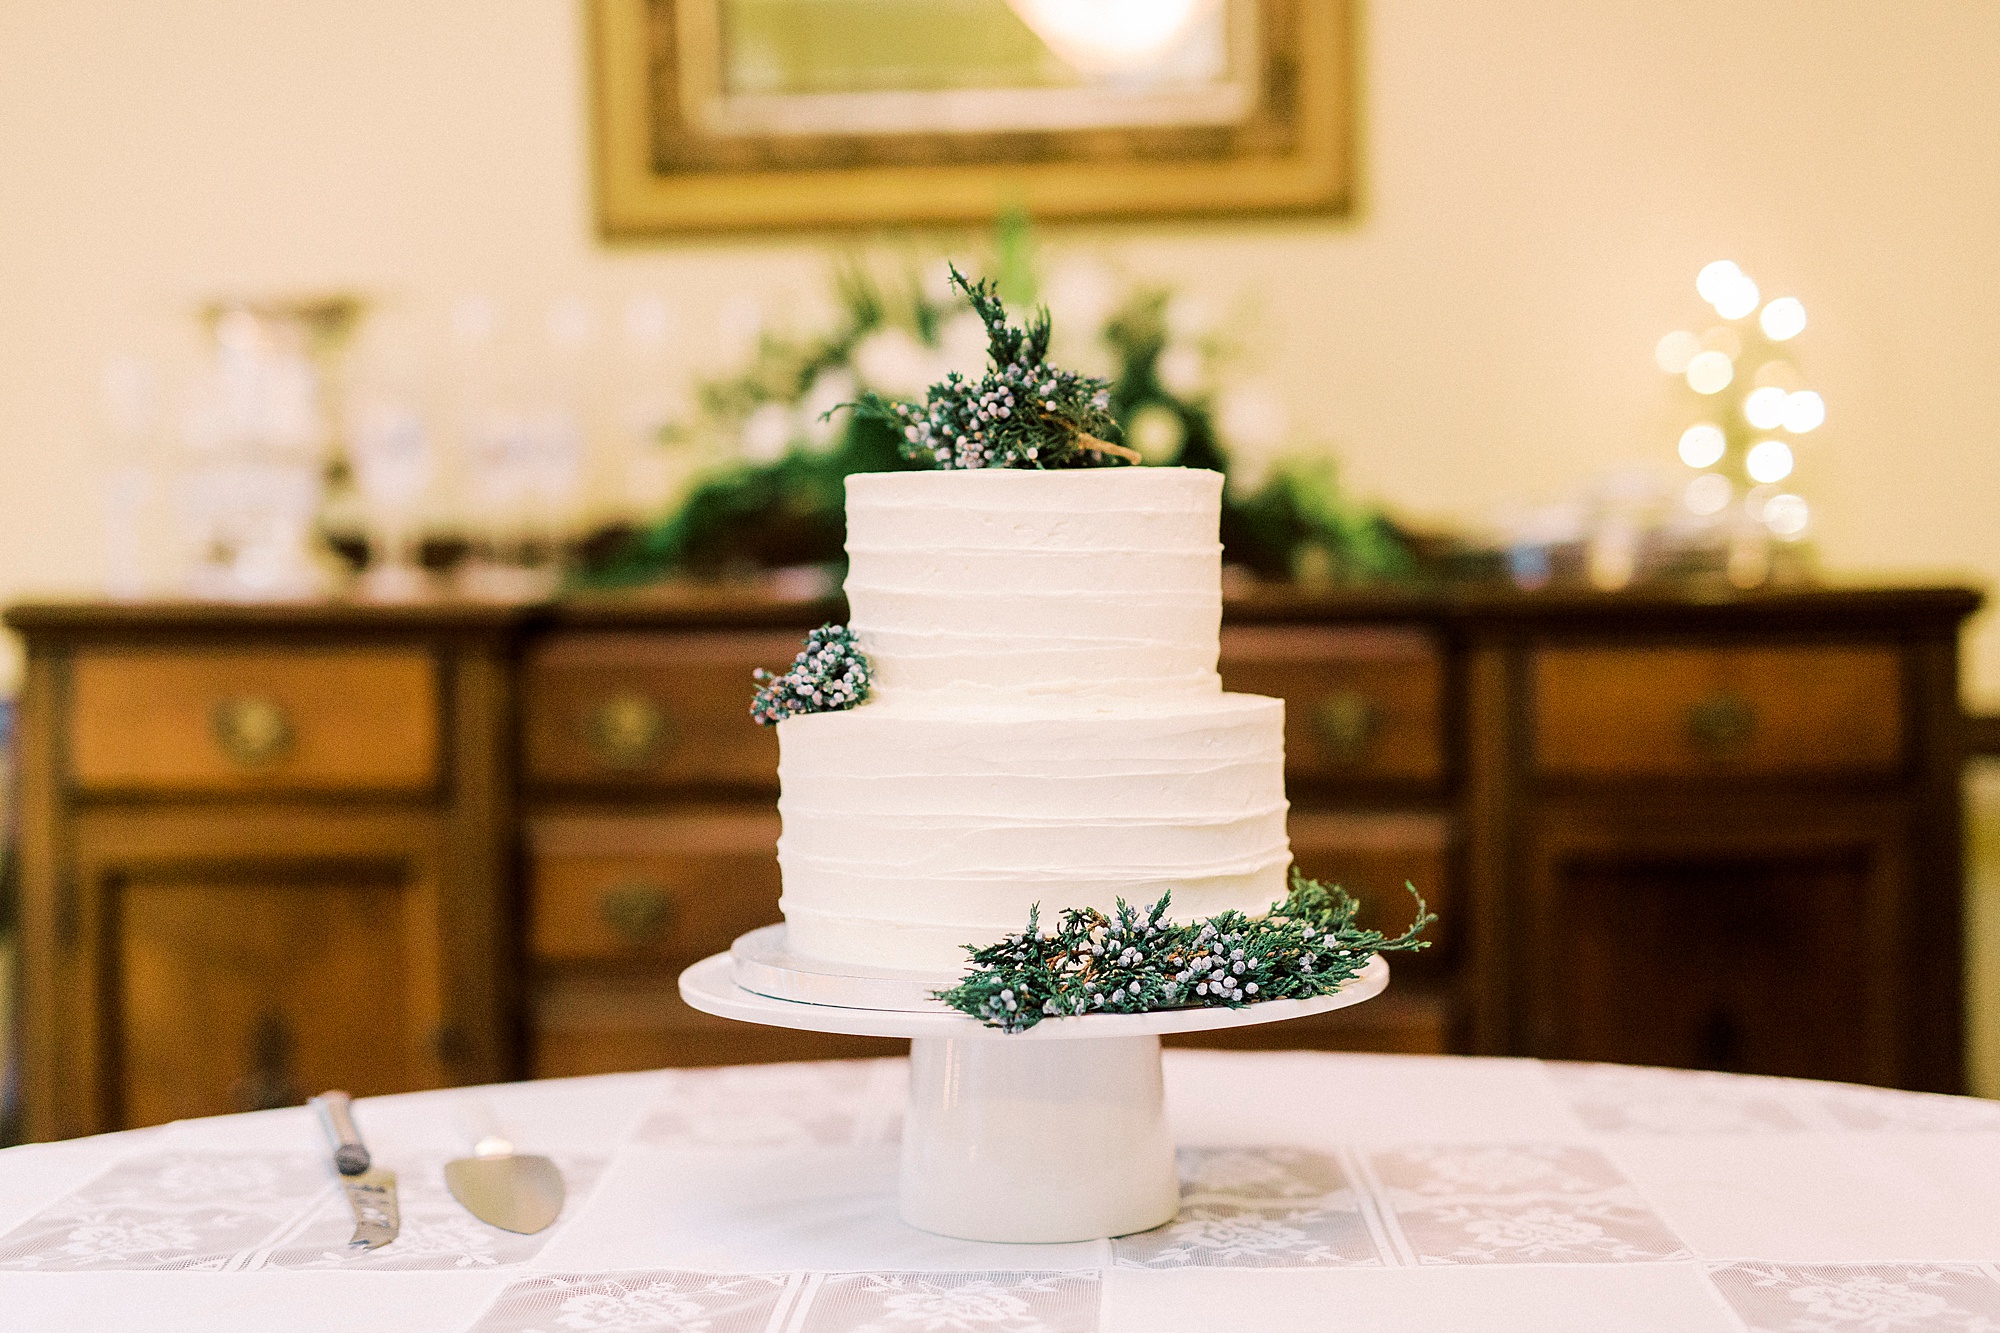 tiered wedding cake with greenery for romantic winter wedding in Bedford VA